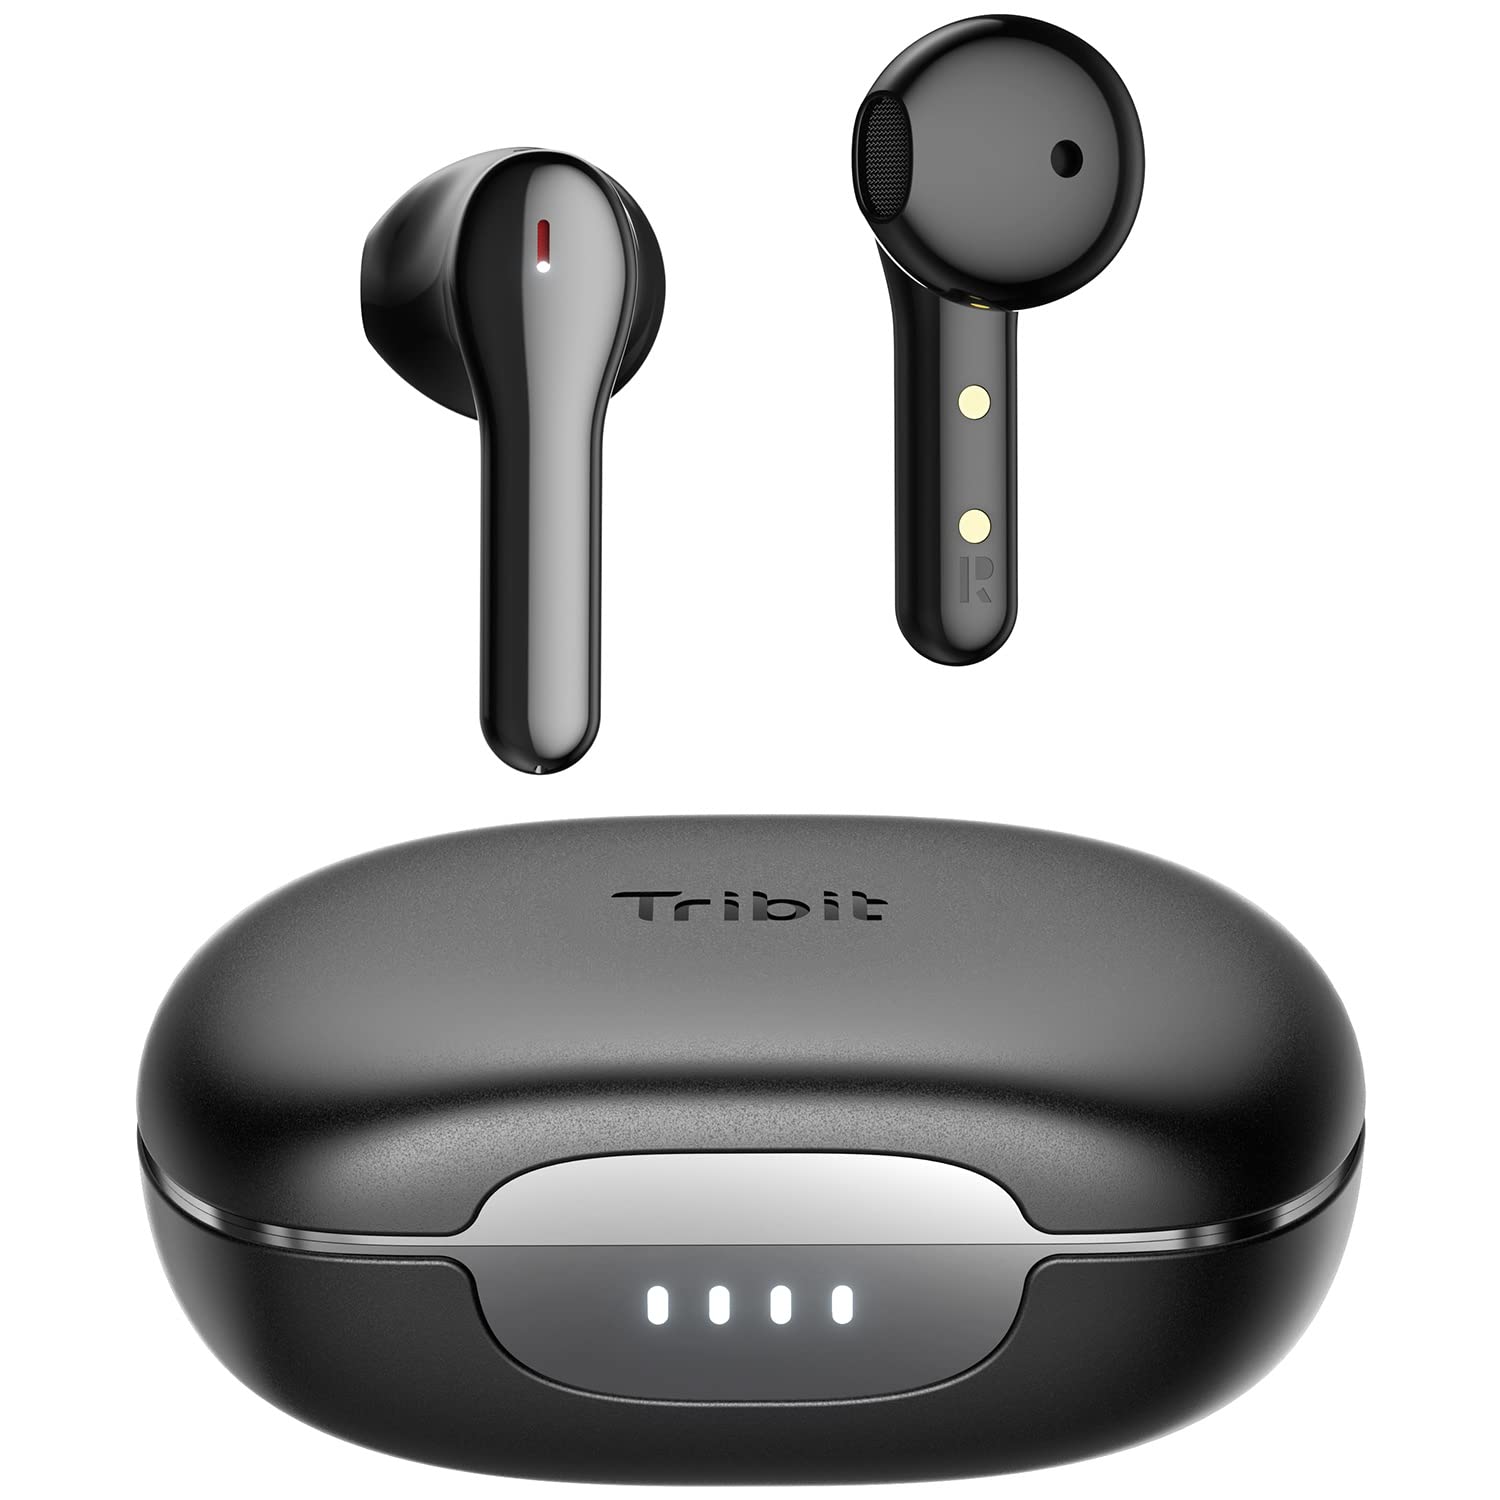 Tribit Wireless Earbuds, FlyBuds C2 $29.99 Amazon Prime deal